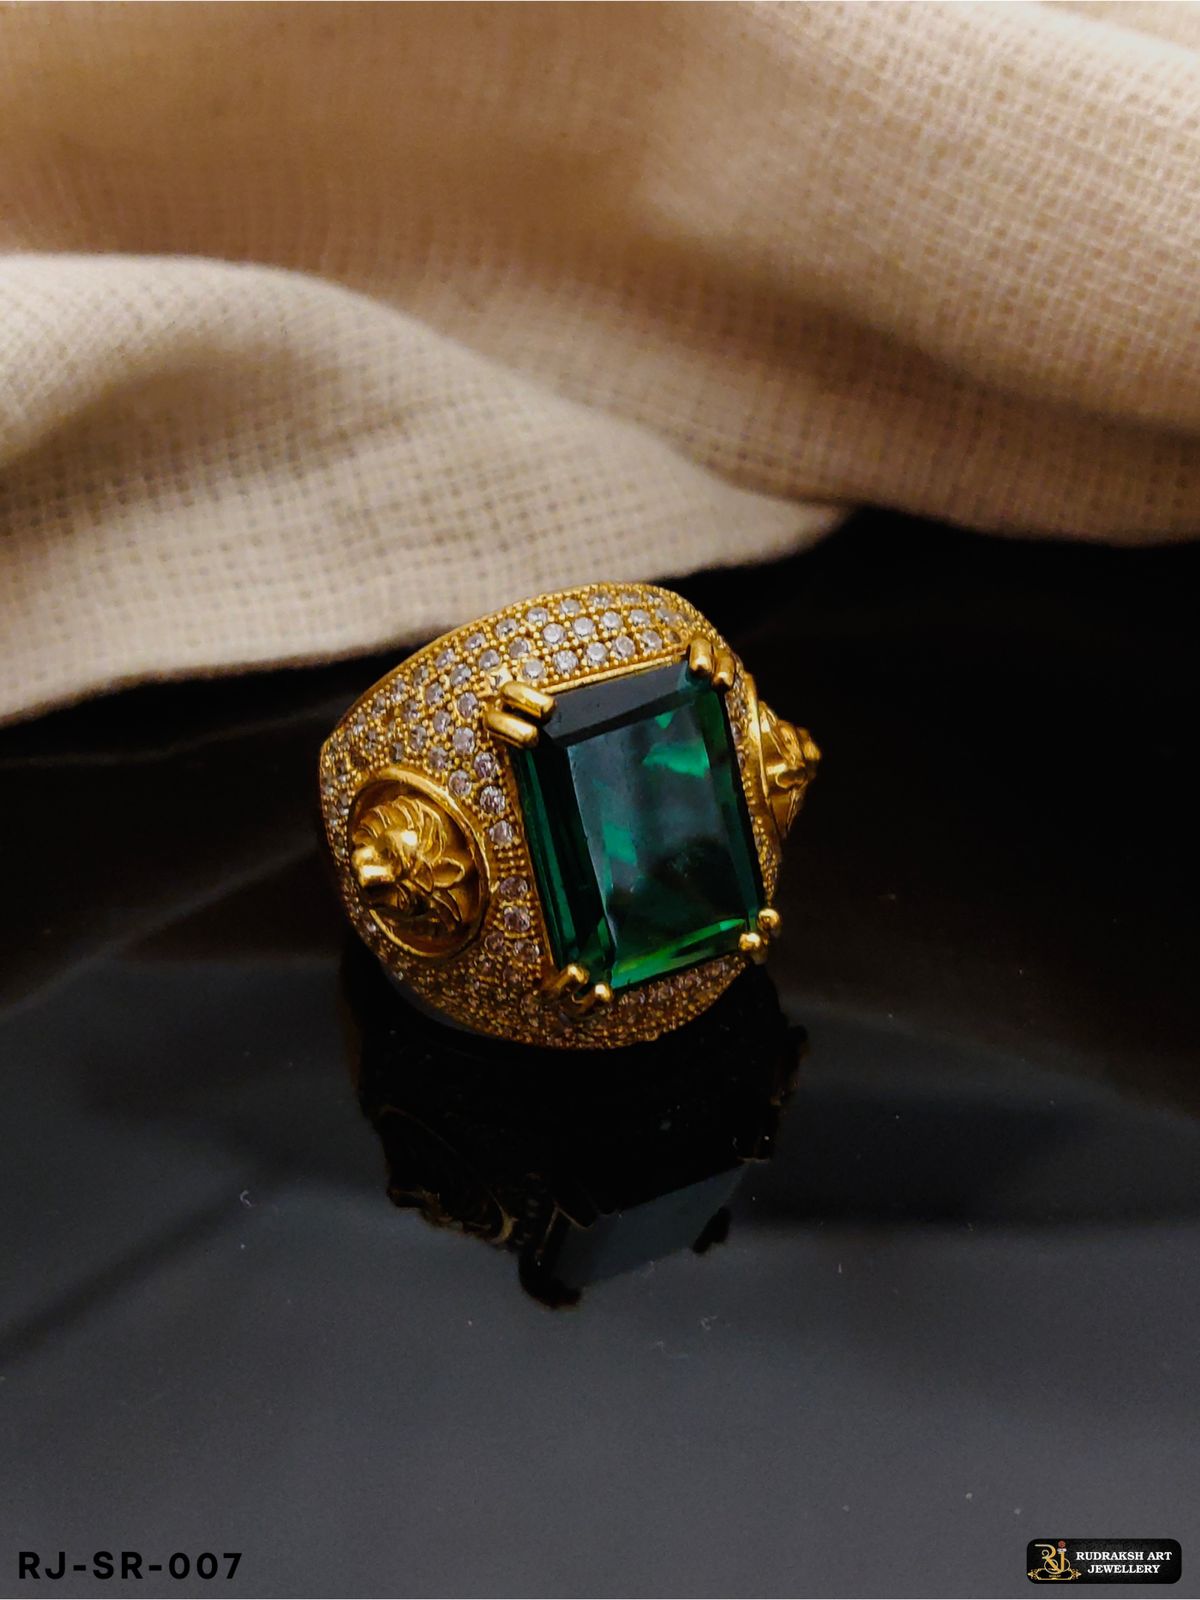 Exclusive Green Stone Streamlined Design Superior Quality Ring SR - 007